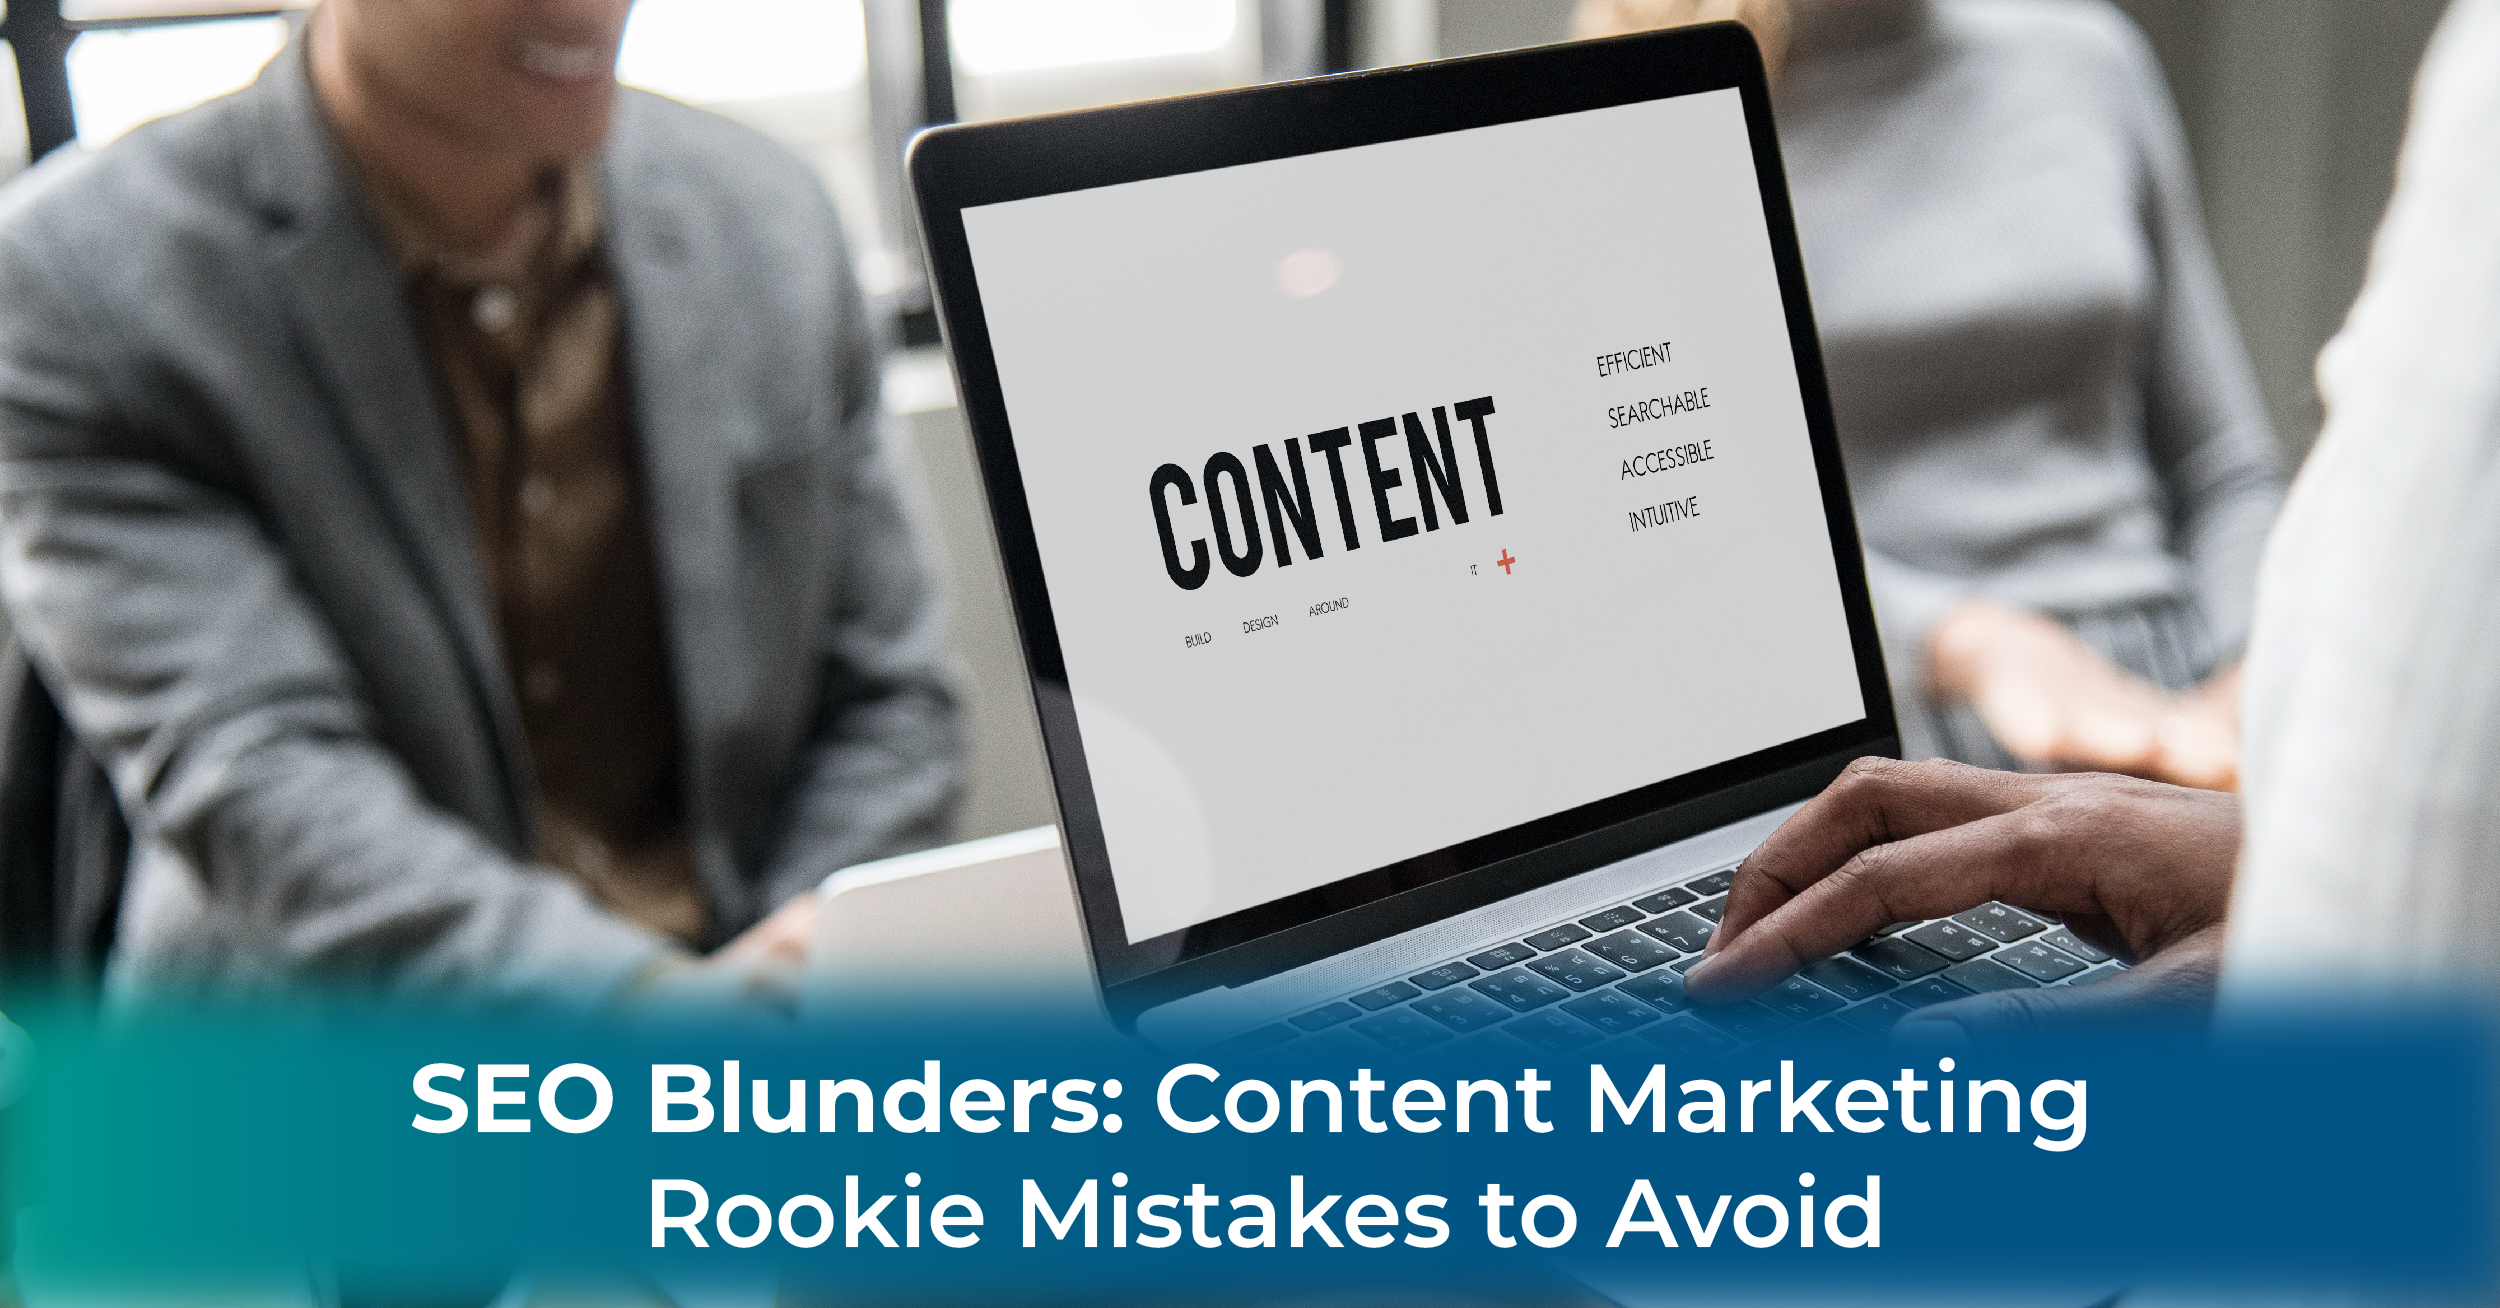 SEO Blunders: Content Marketing Rookie Mistakes to Avoid